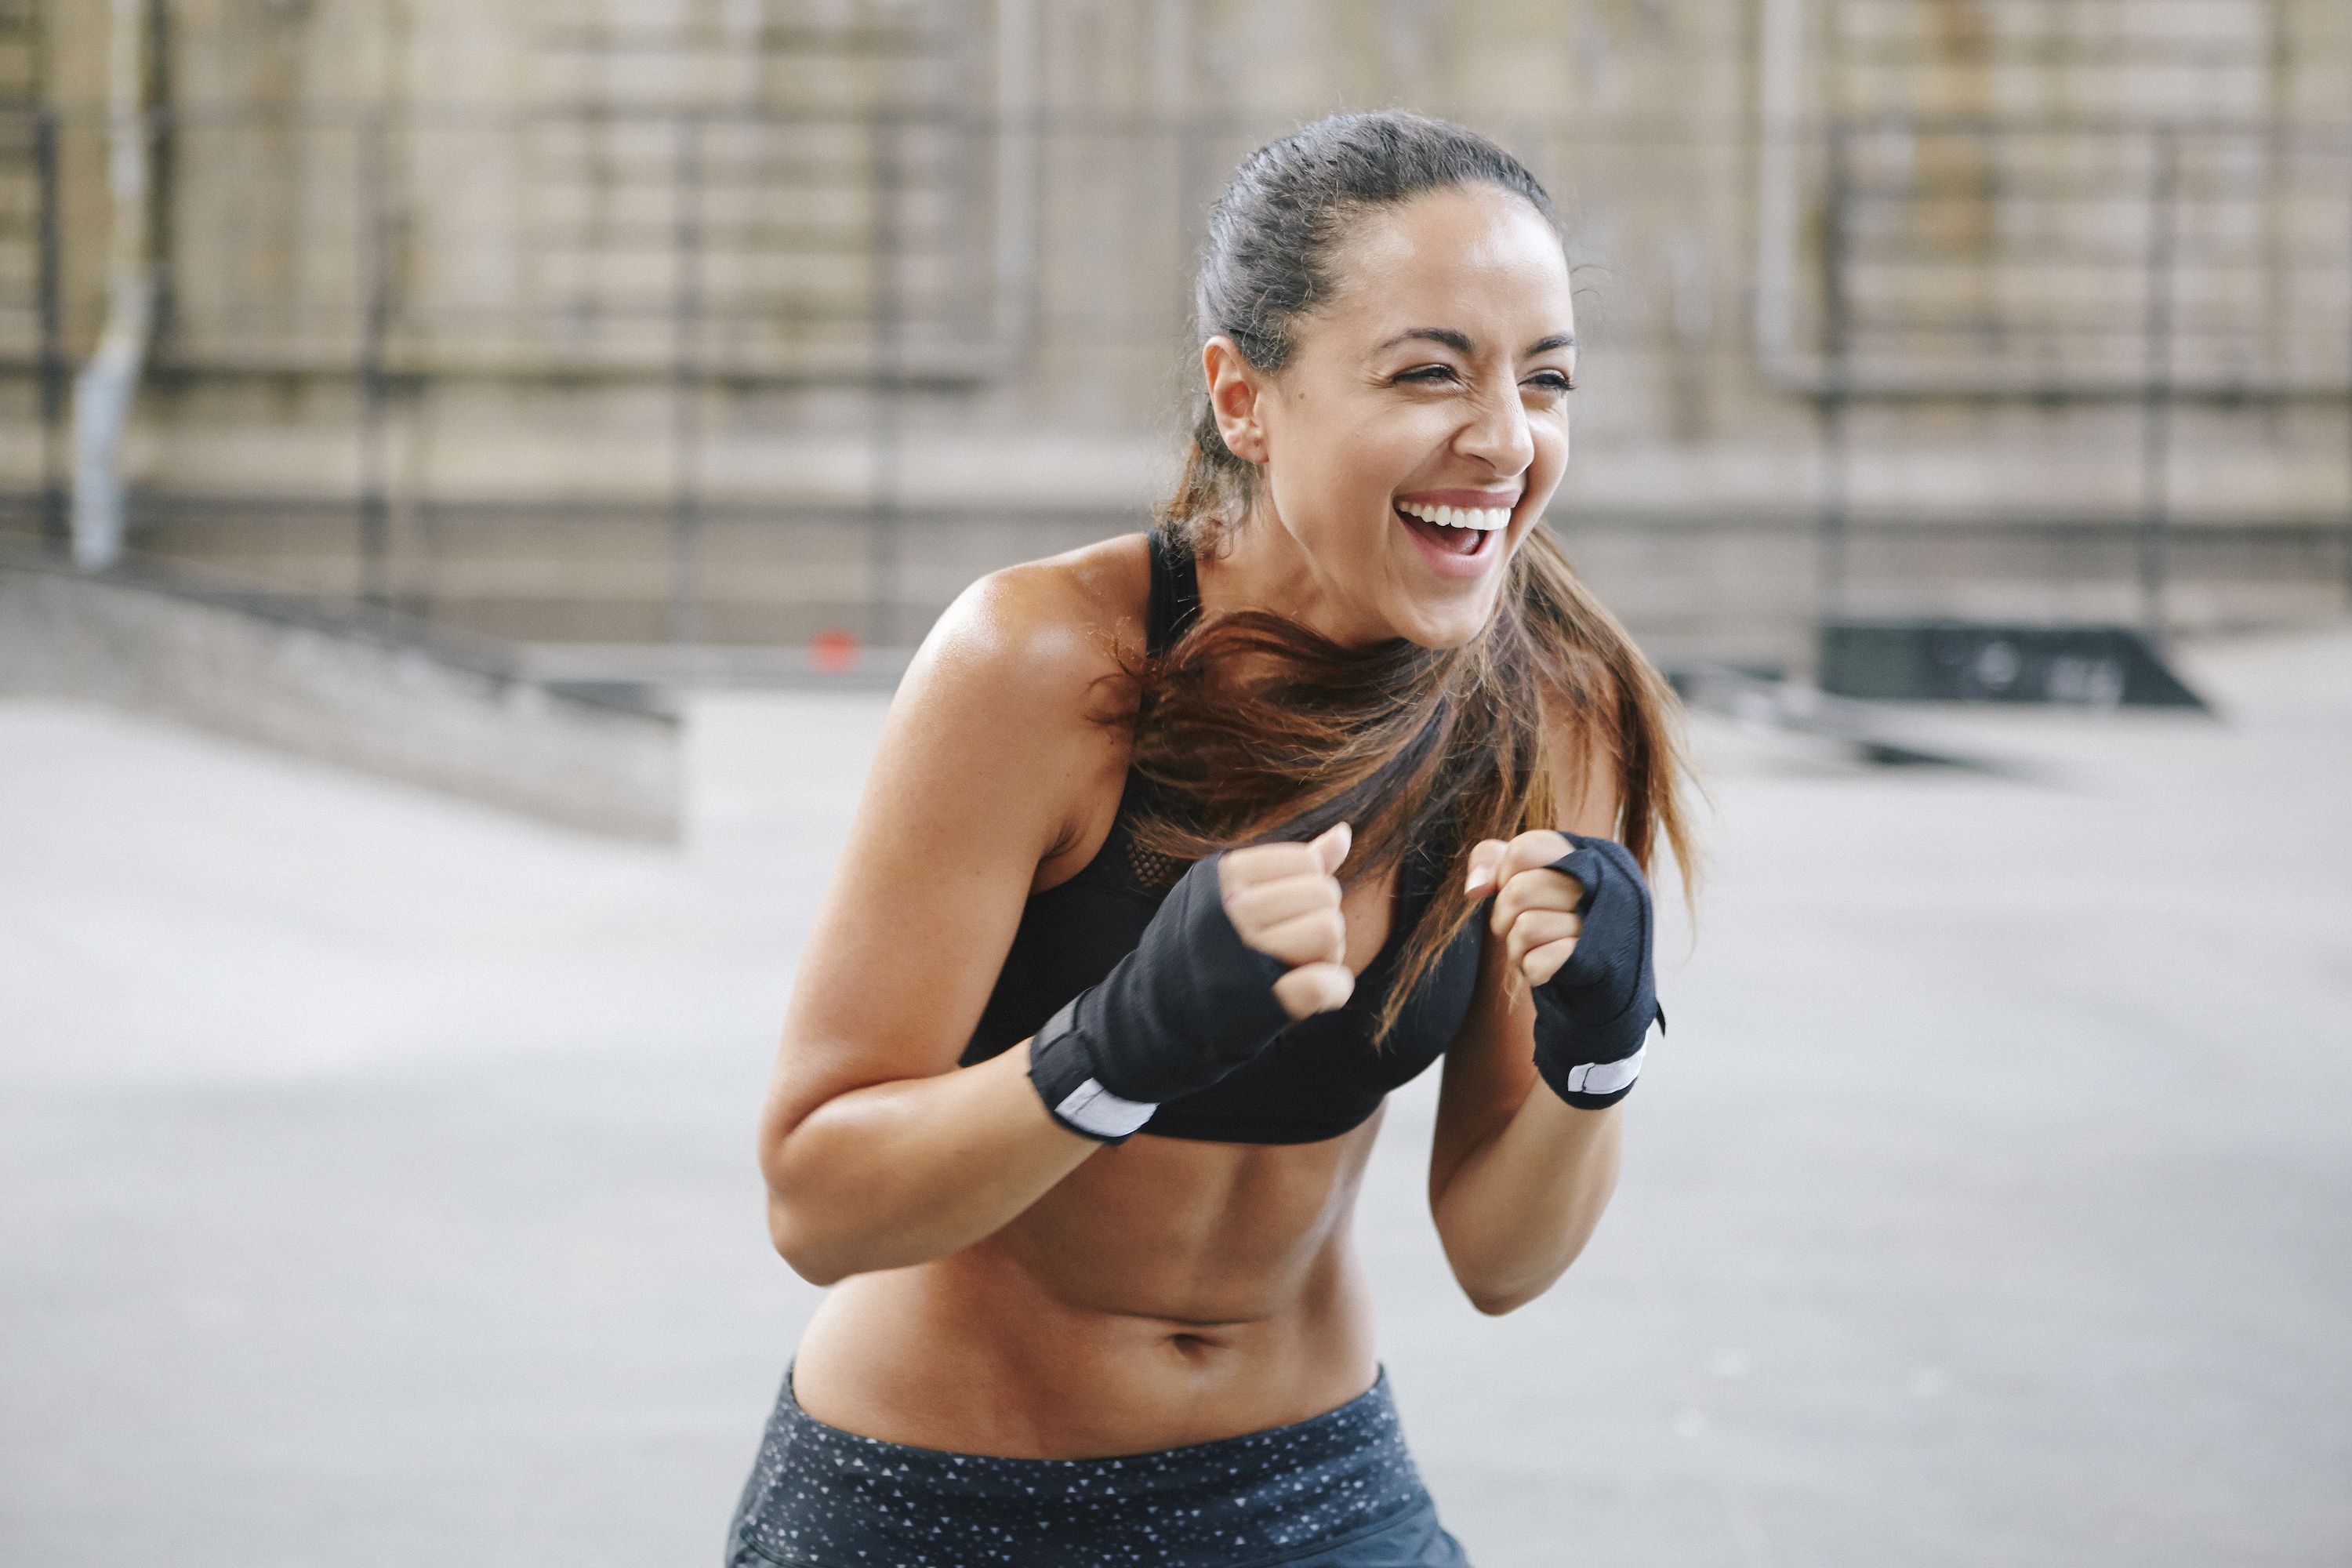 kickboxing workout for beginners at home